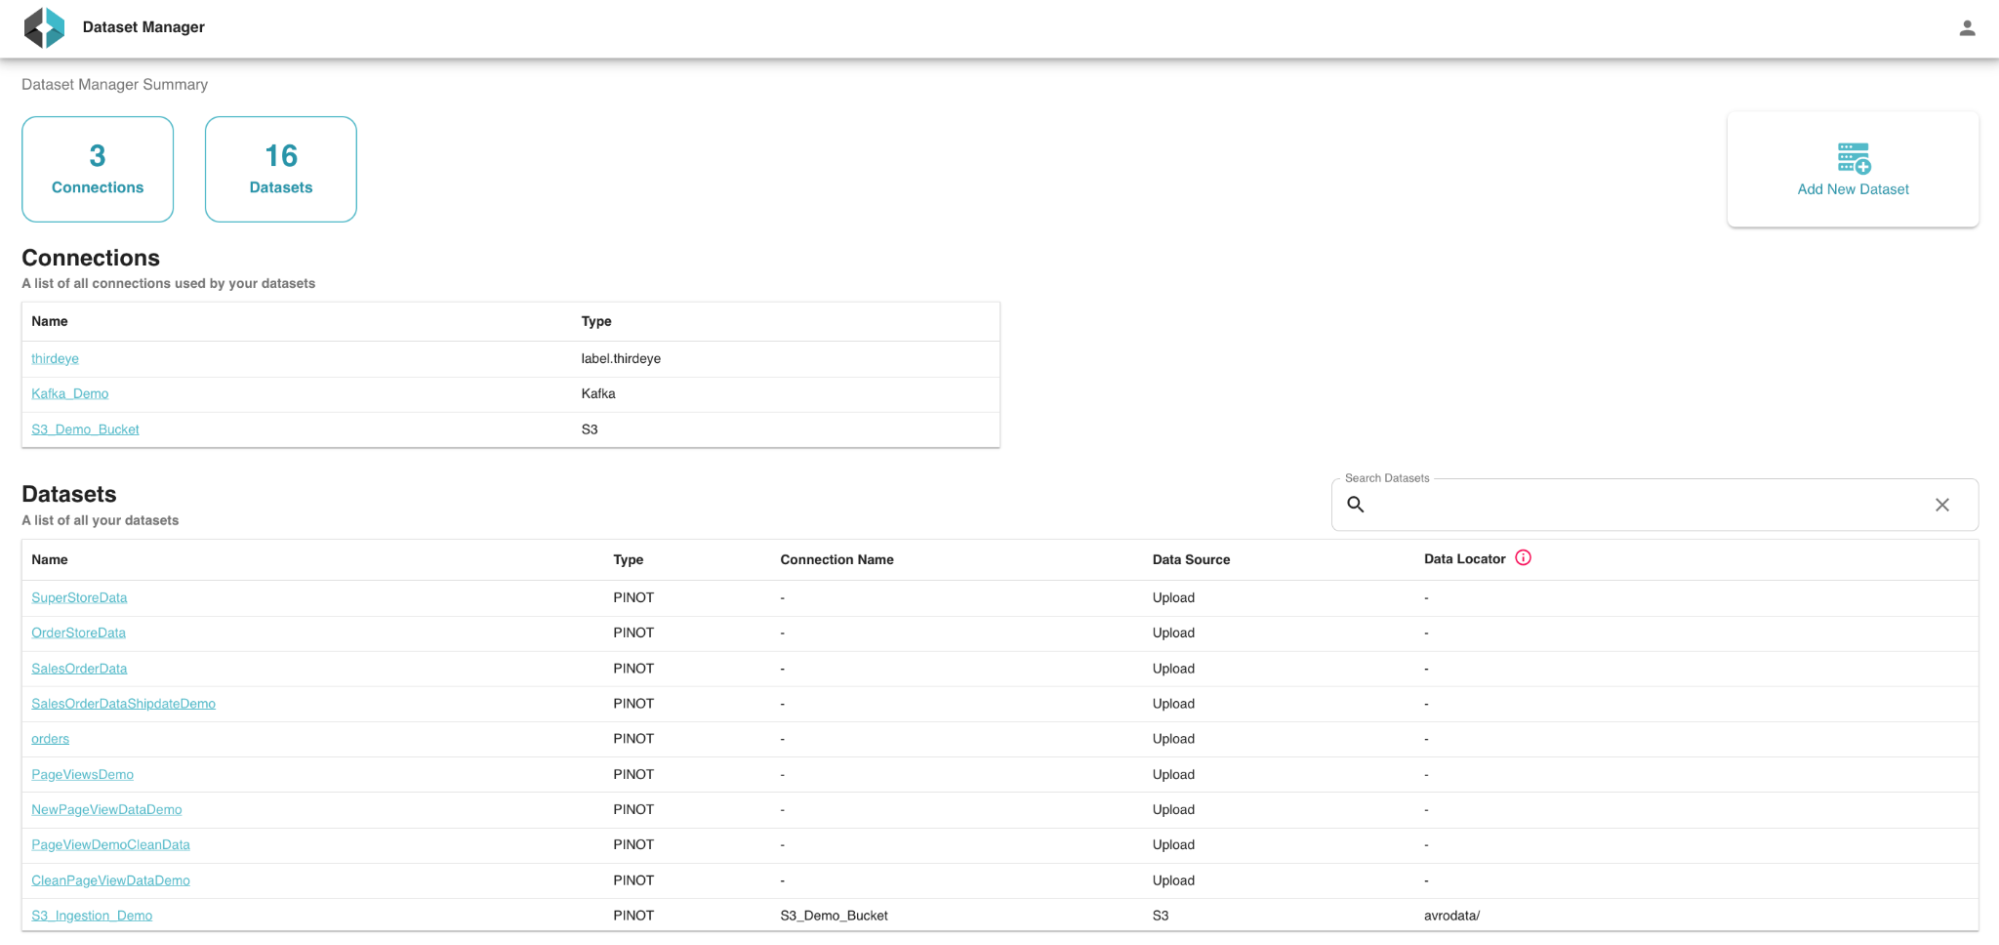 StarTree Data Manager portal